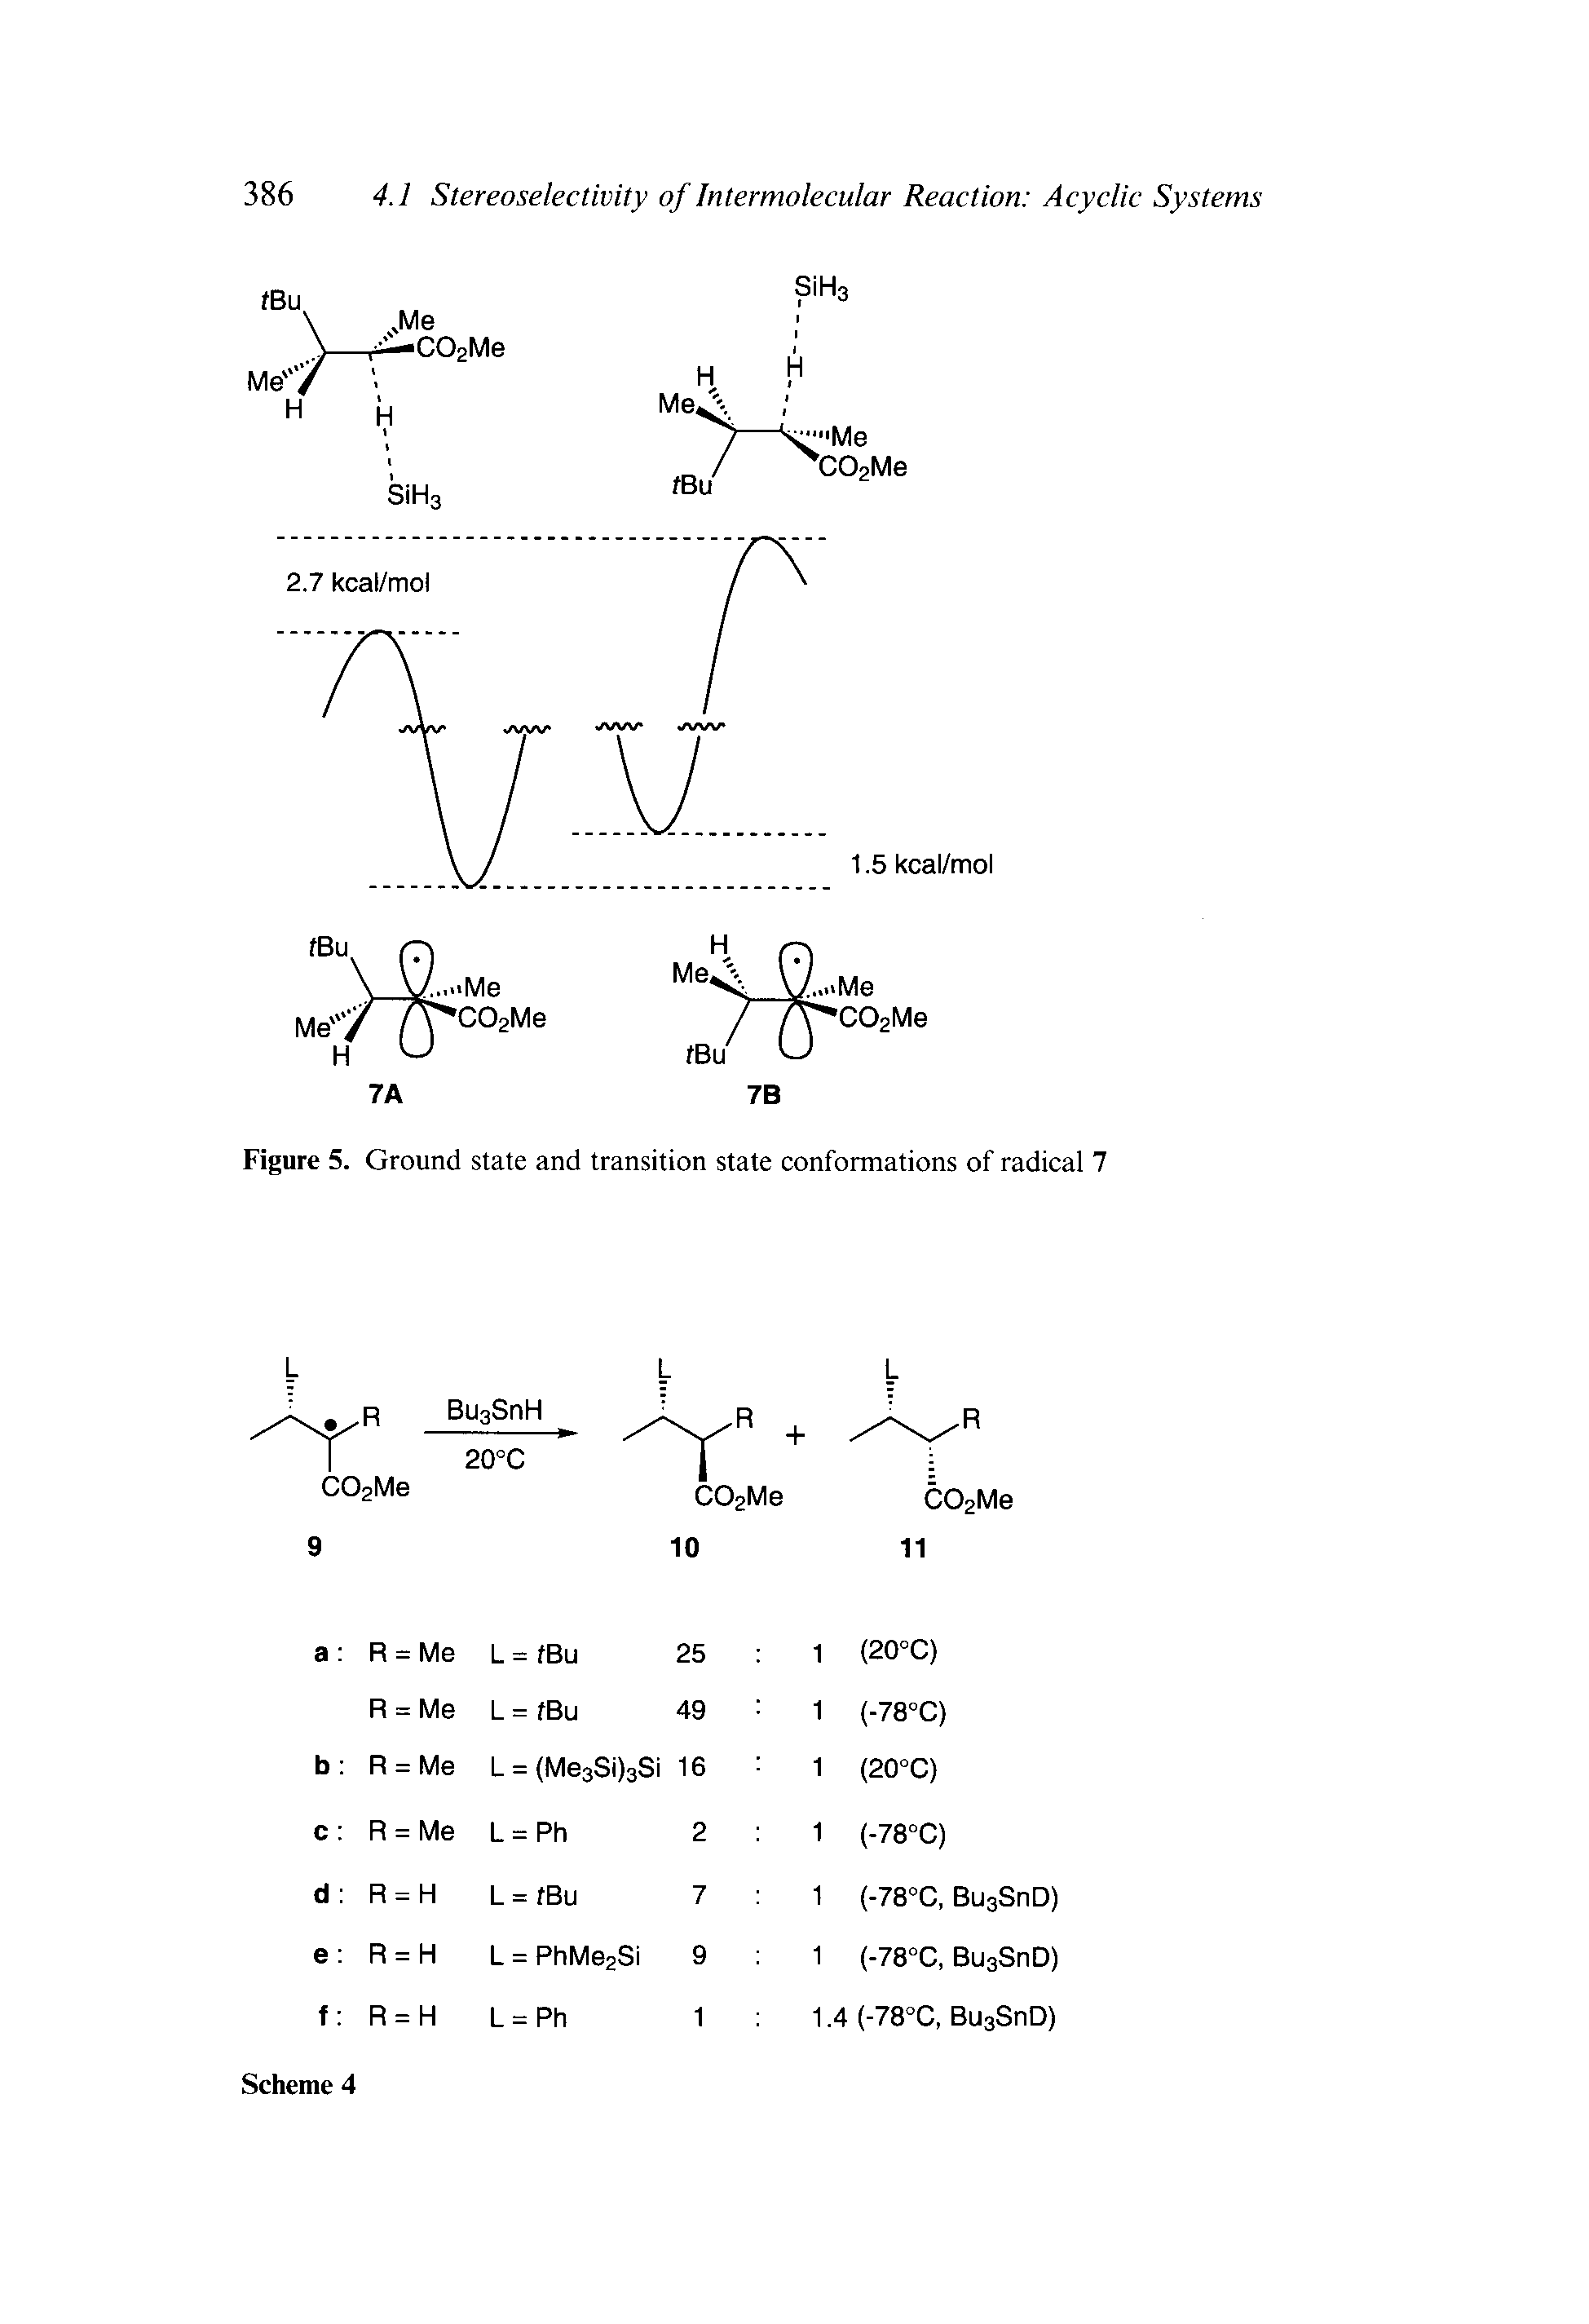 Figure 5. Ground state and transition state conformations of radical 7...